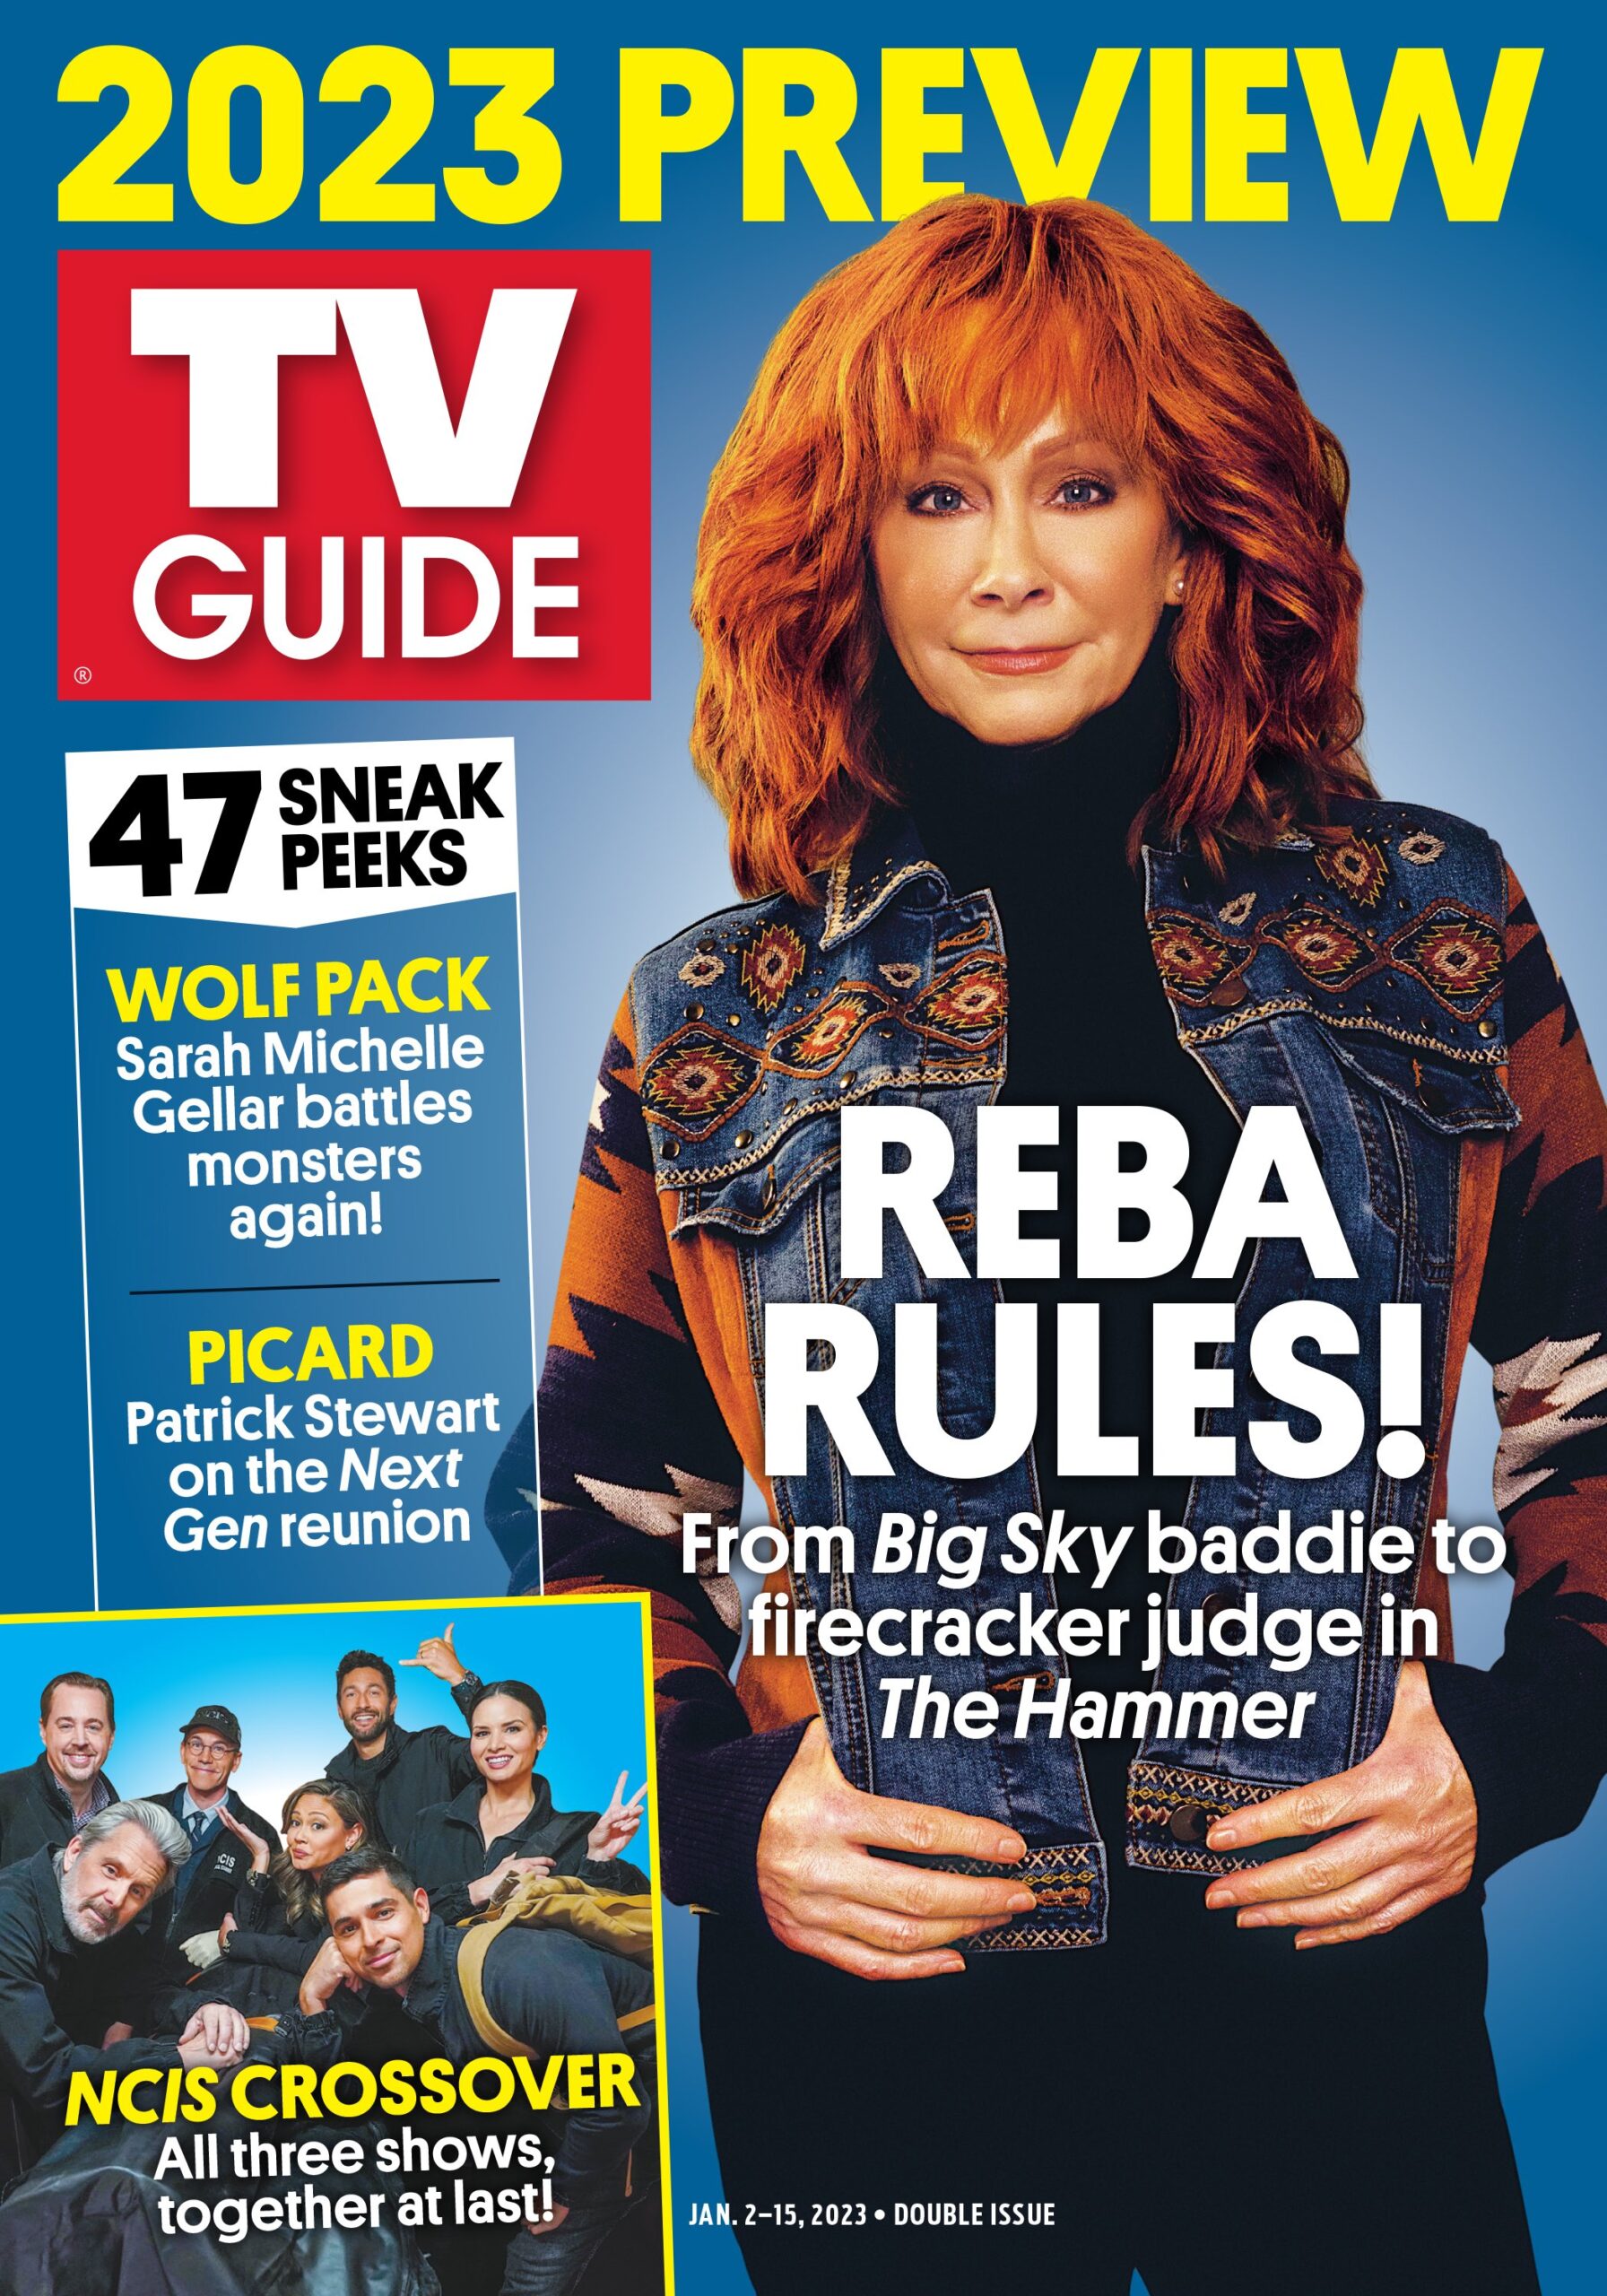 29 December 2022 The Official Site Of Tv Guide Magazine